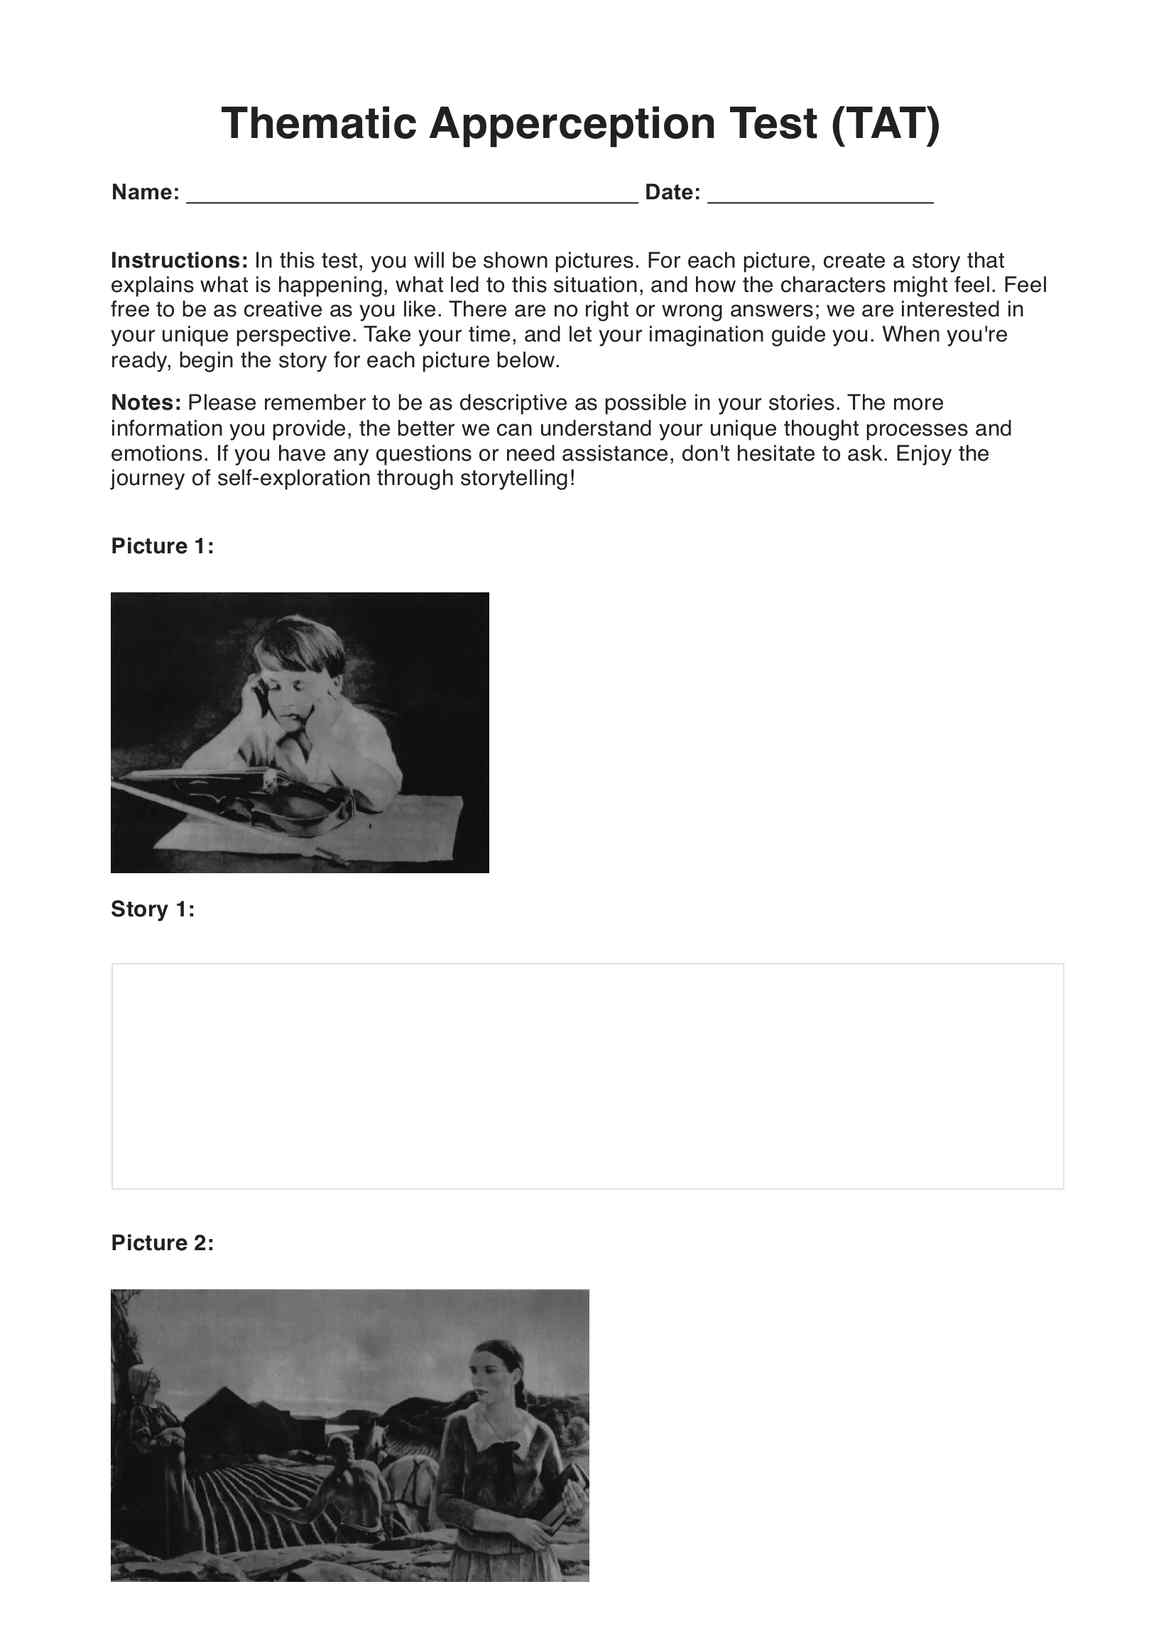 Thematic Apperception Test PDF Example